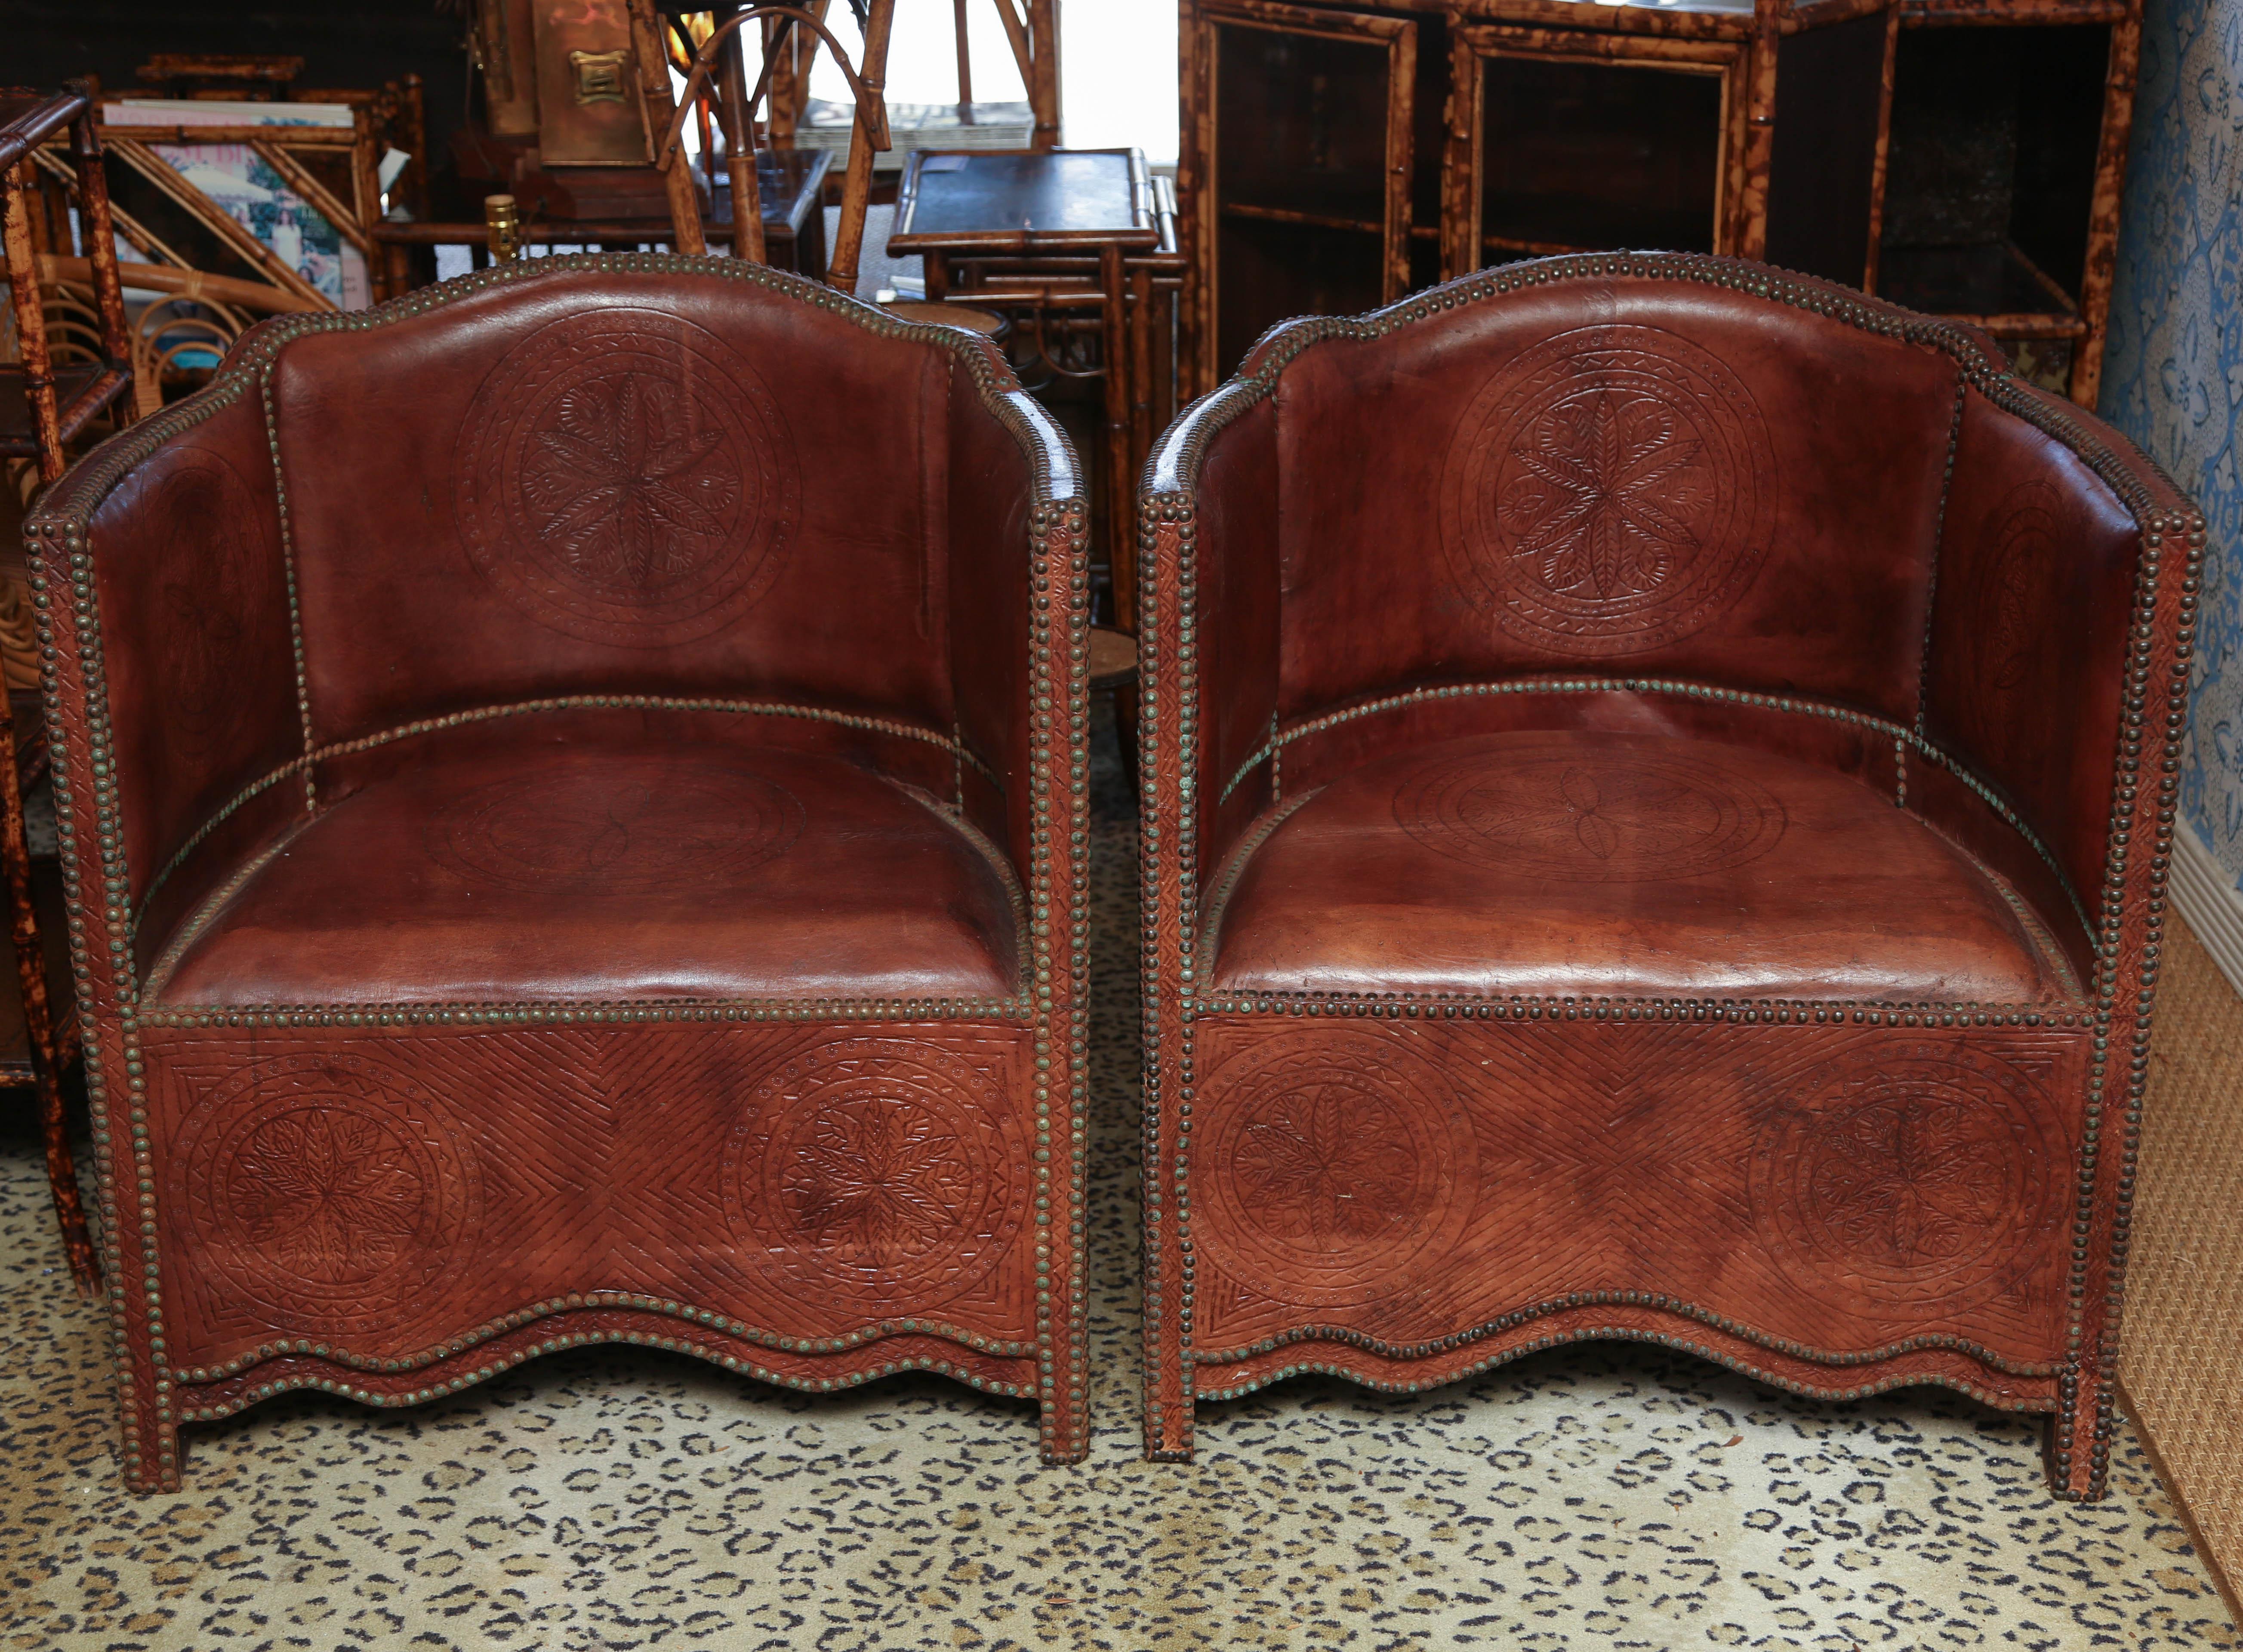 Made with hand tanned hand tooled leather in Morocco, showing the natural imperfections in the leather. These chairs are vintage, circa 1960 as evidenced by the wear and tarnishing on the brass nail heads. Beautifully handcrafted and decorated,